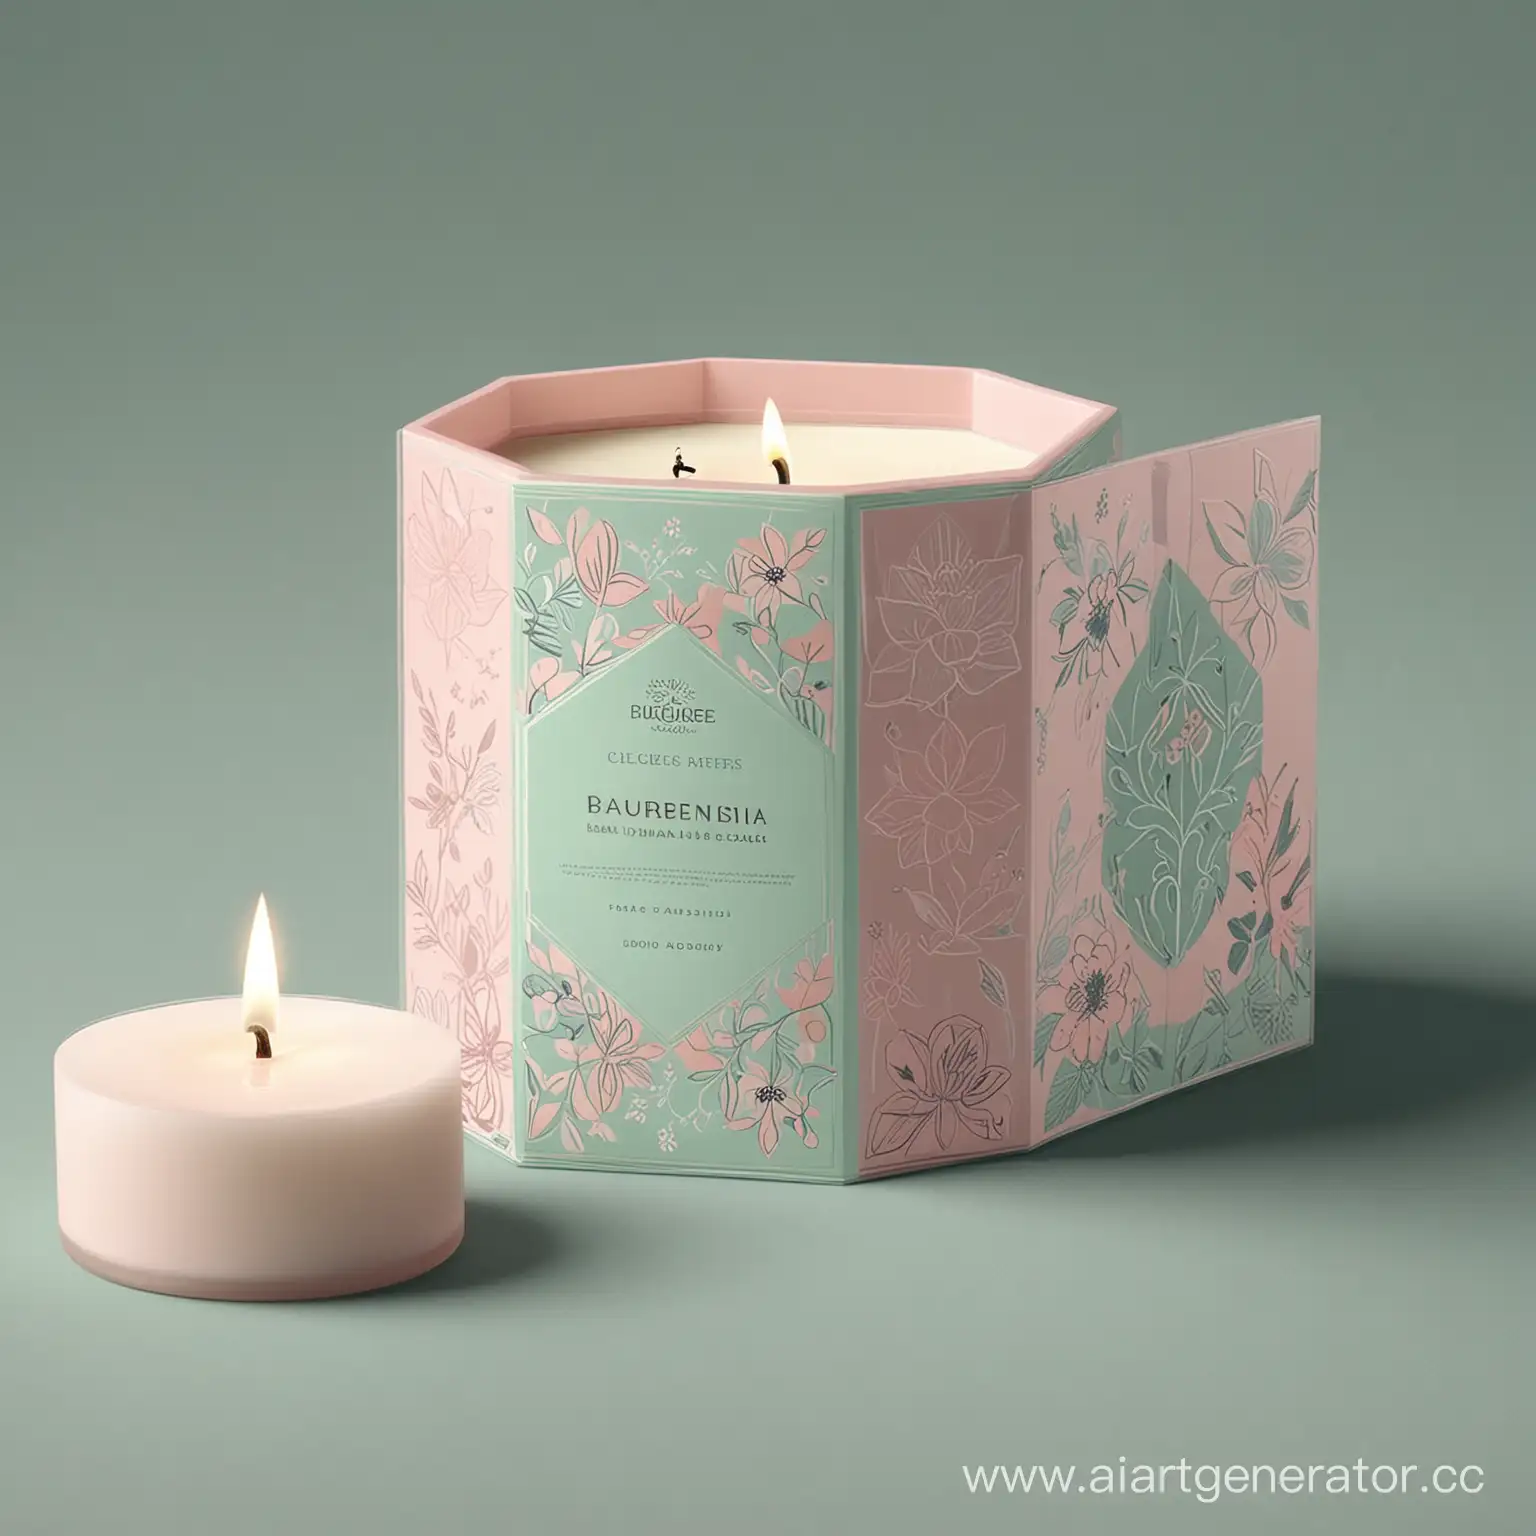 Create a new candle unusual box design with a modern and elegant aesthetic. Incorporate soft pastel colors such as blush pink and mint green. Include floral elements and geometric patterns for a contemporary touch. The box should have a minimalist design with clean lines and ample space for branding and product information. Please ensure that the design reflects the luxurious and calming nature of the candles. Feel free to experiment with different layouts and compositions to achieve a visually appealing result.